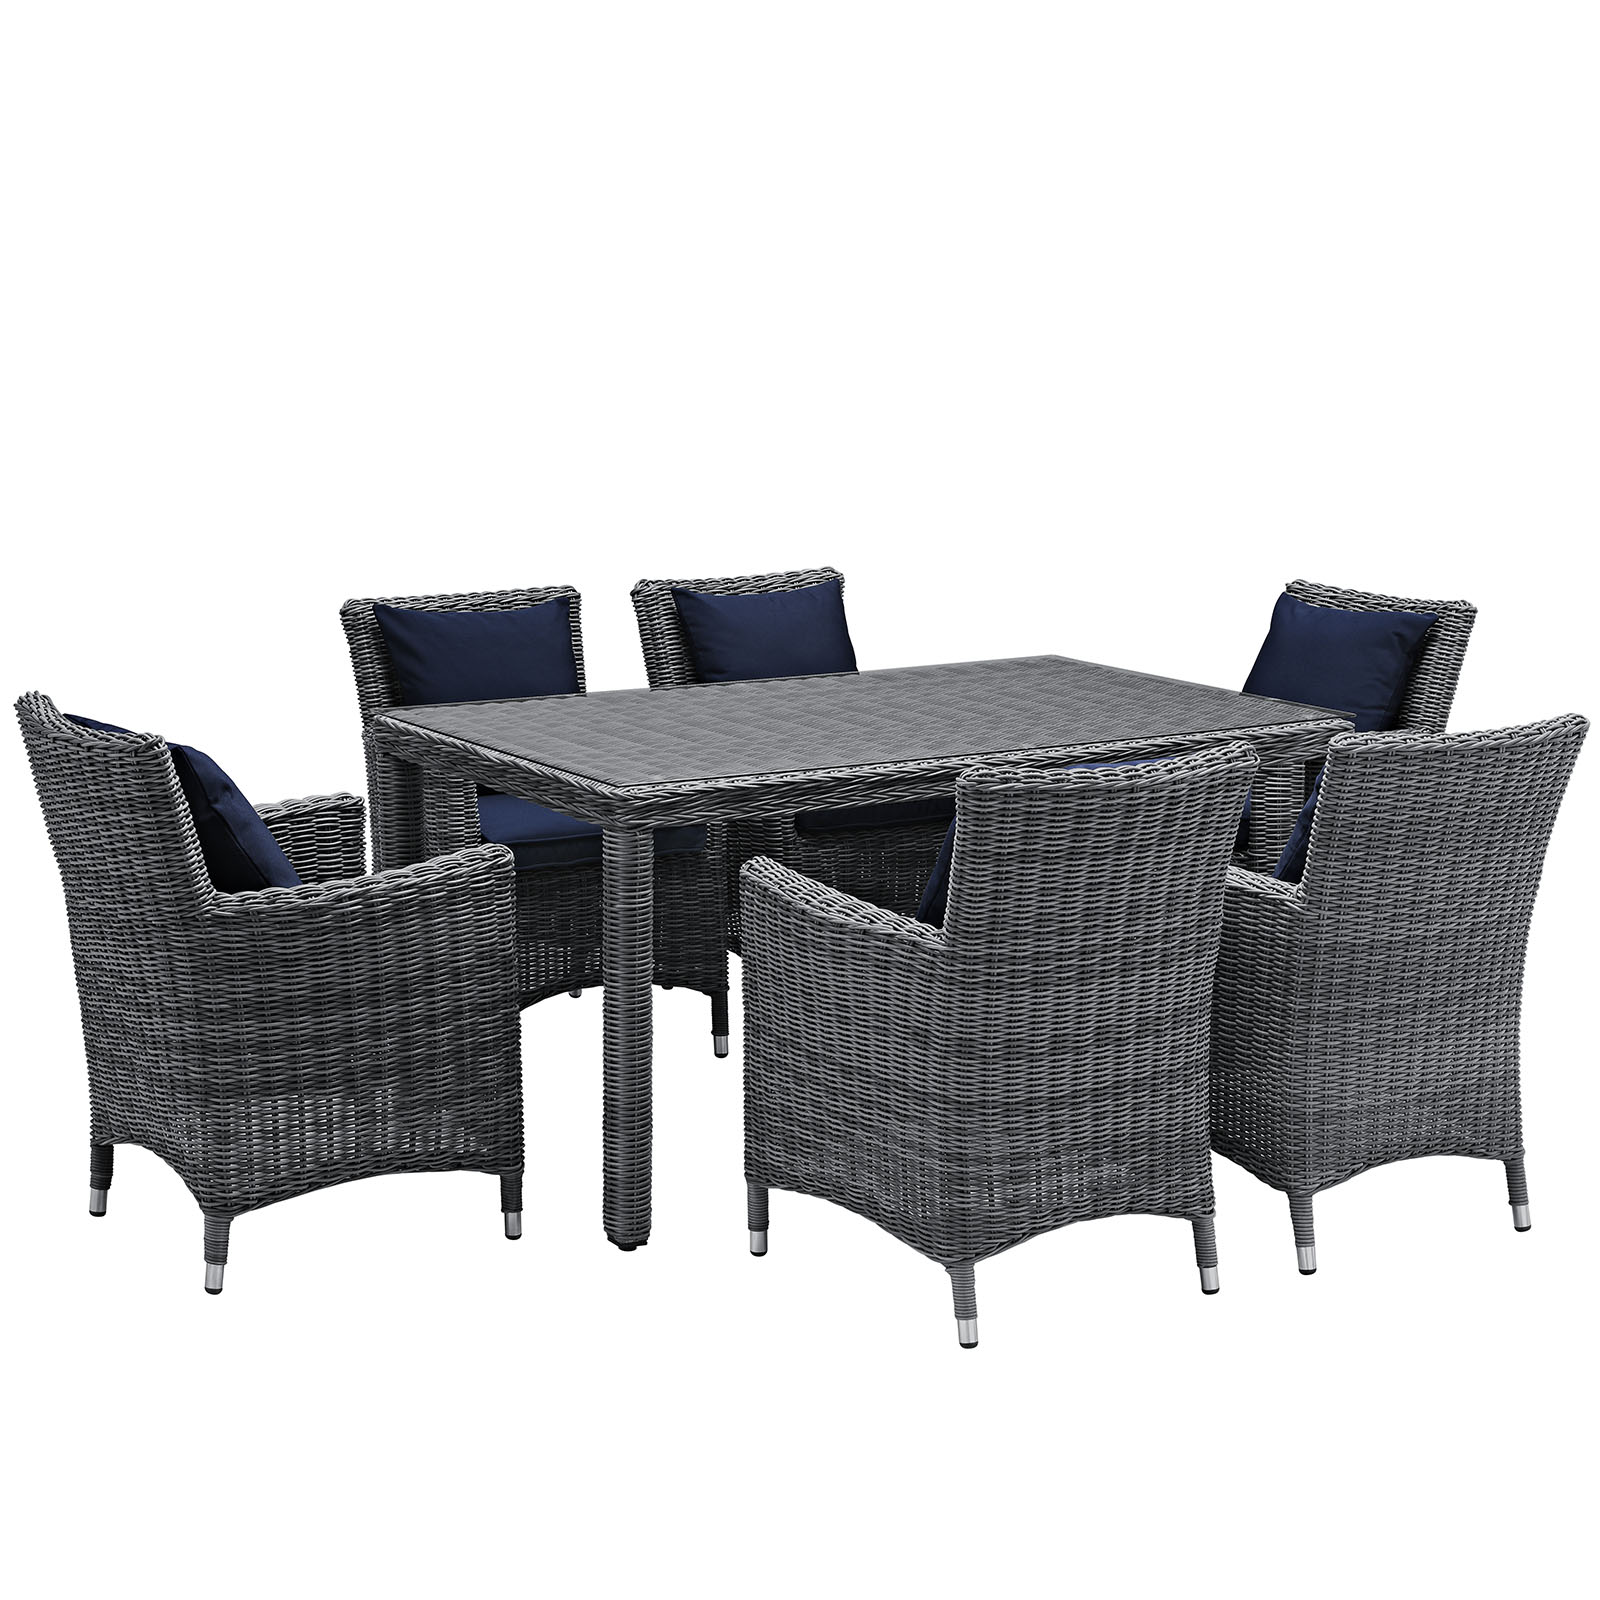 Modern Contemporary Urban Design Outdoor Patio Balcony Seven PCS Dining Chairs and Table Set, Navy Blue, Rattan - image 1 of 7